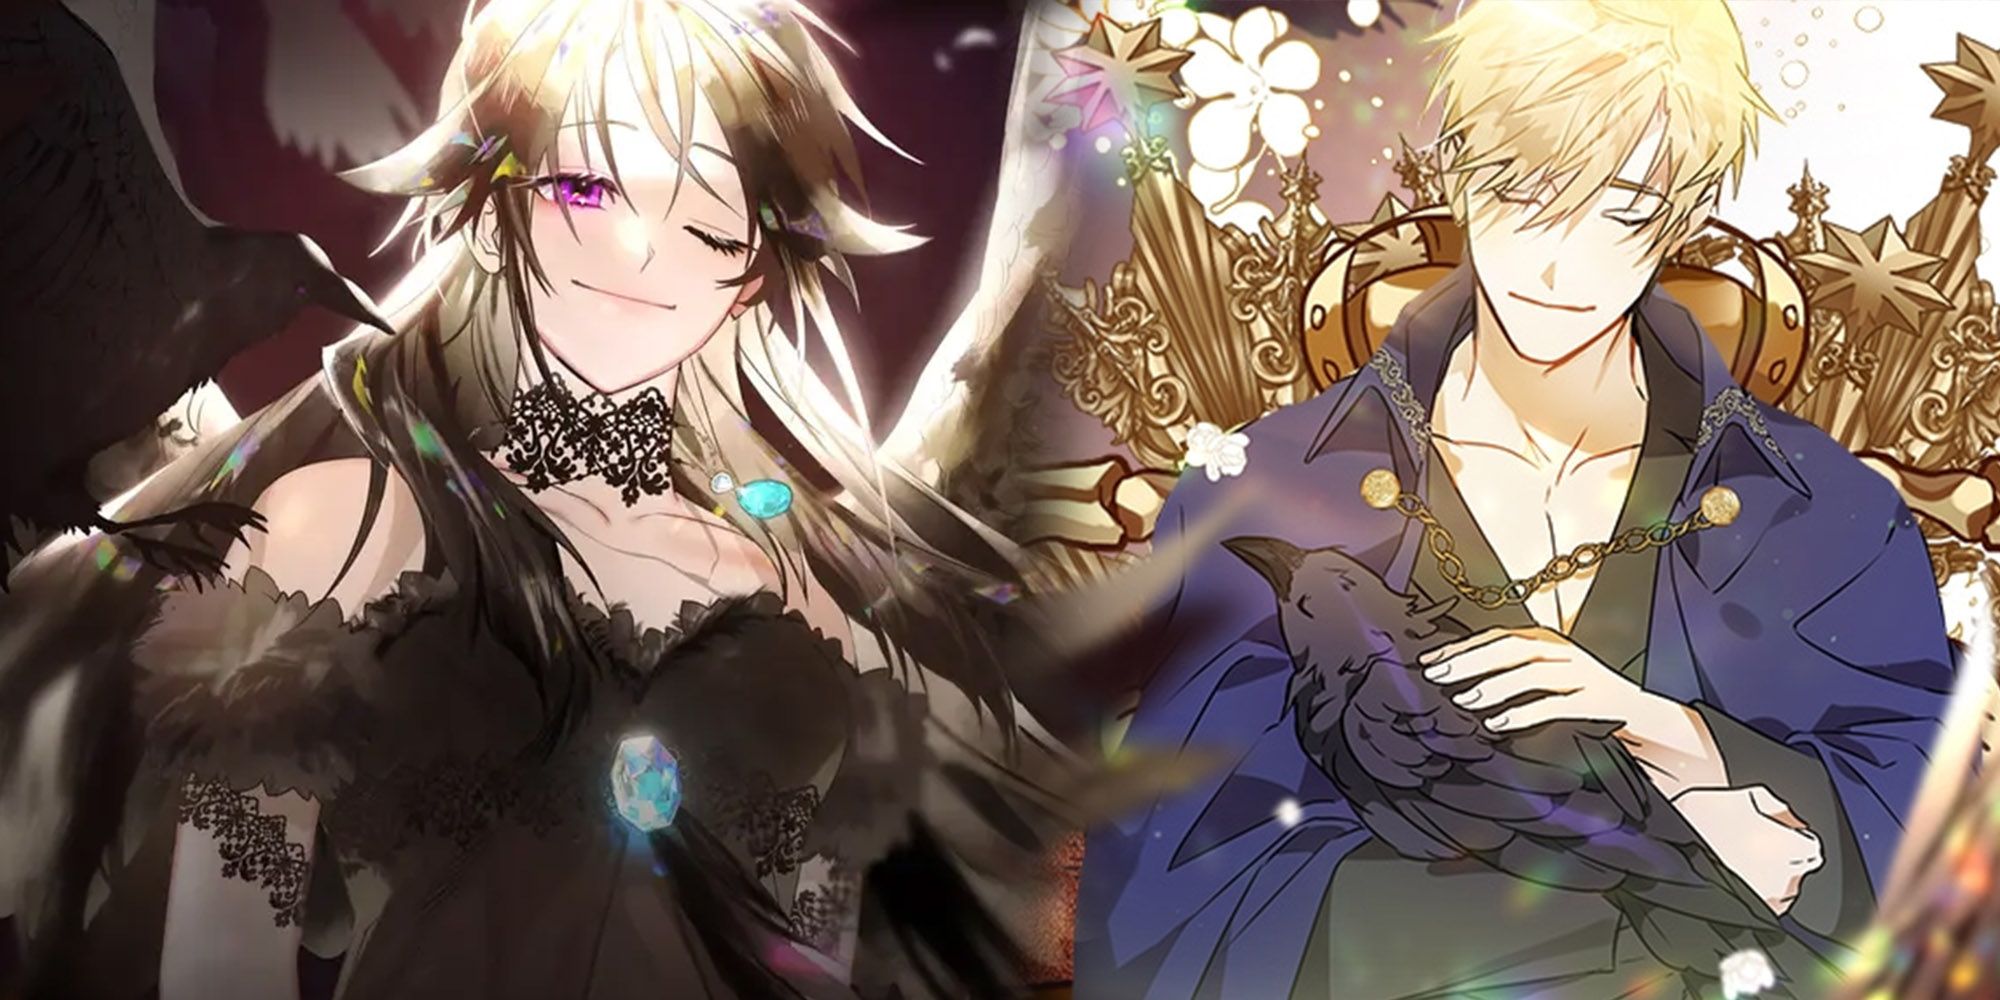 The Crows Prince - Main Character Smiling Toward Camera Next To Image Of Prince Karmeut Holding Her As A Crow